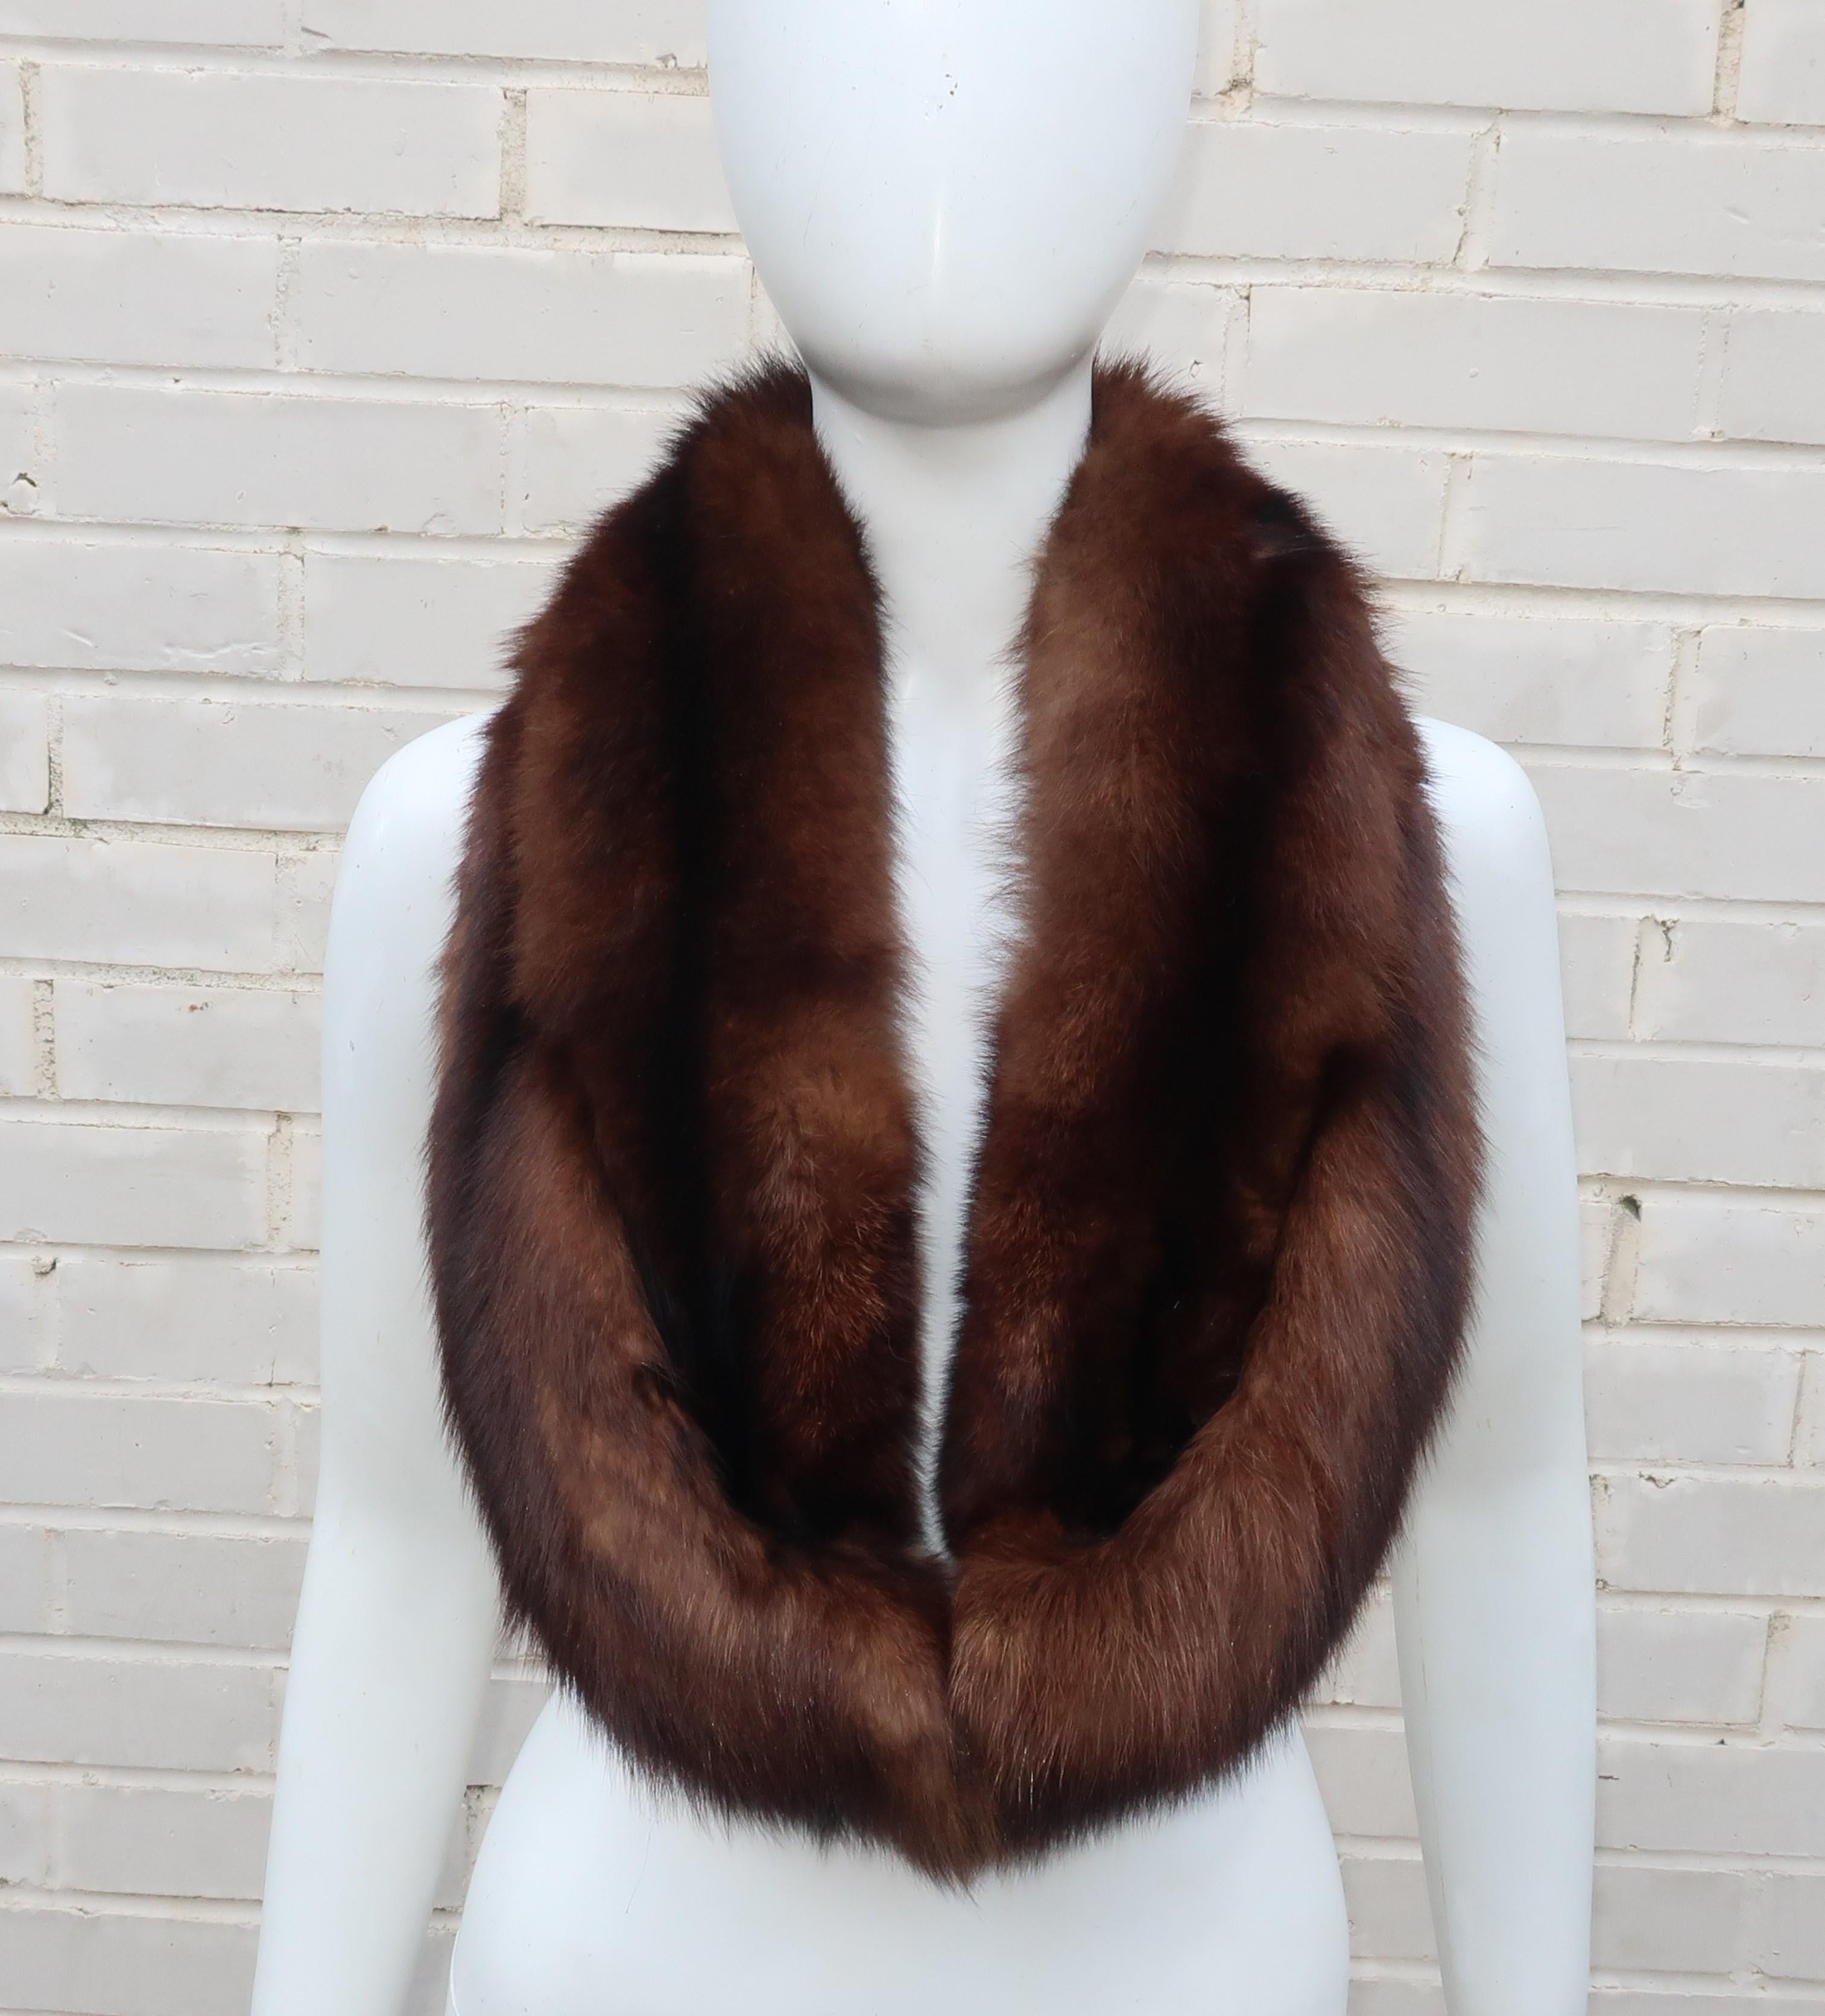 The possibilities are endless with this vintage brown fox fur accessory.  It can be worn as a lush collar for coats, tweed jackets or sweaters and do double duty as an elegant 'shoulder warmer' stole for evening attire.  A different look can even be